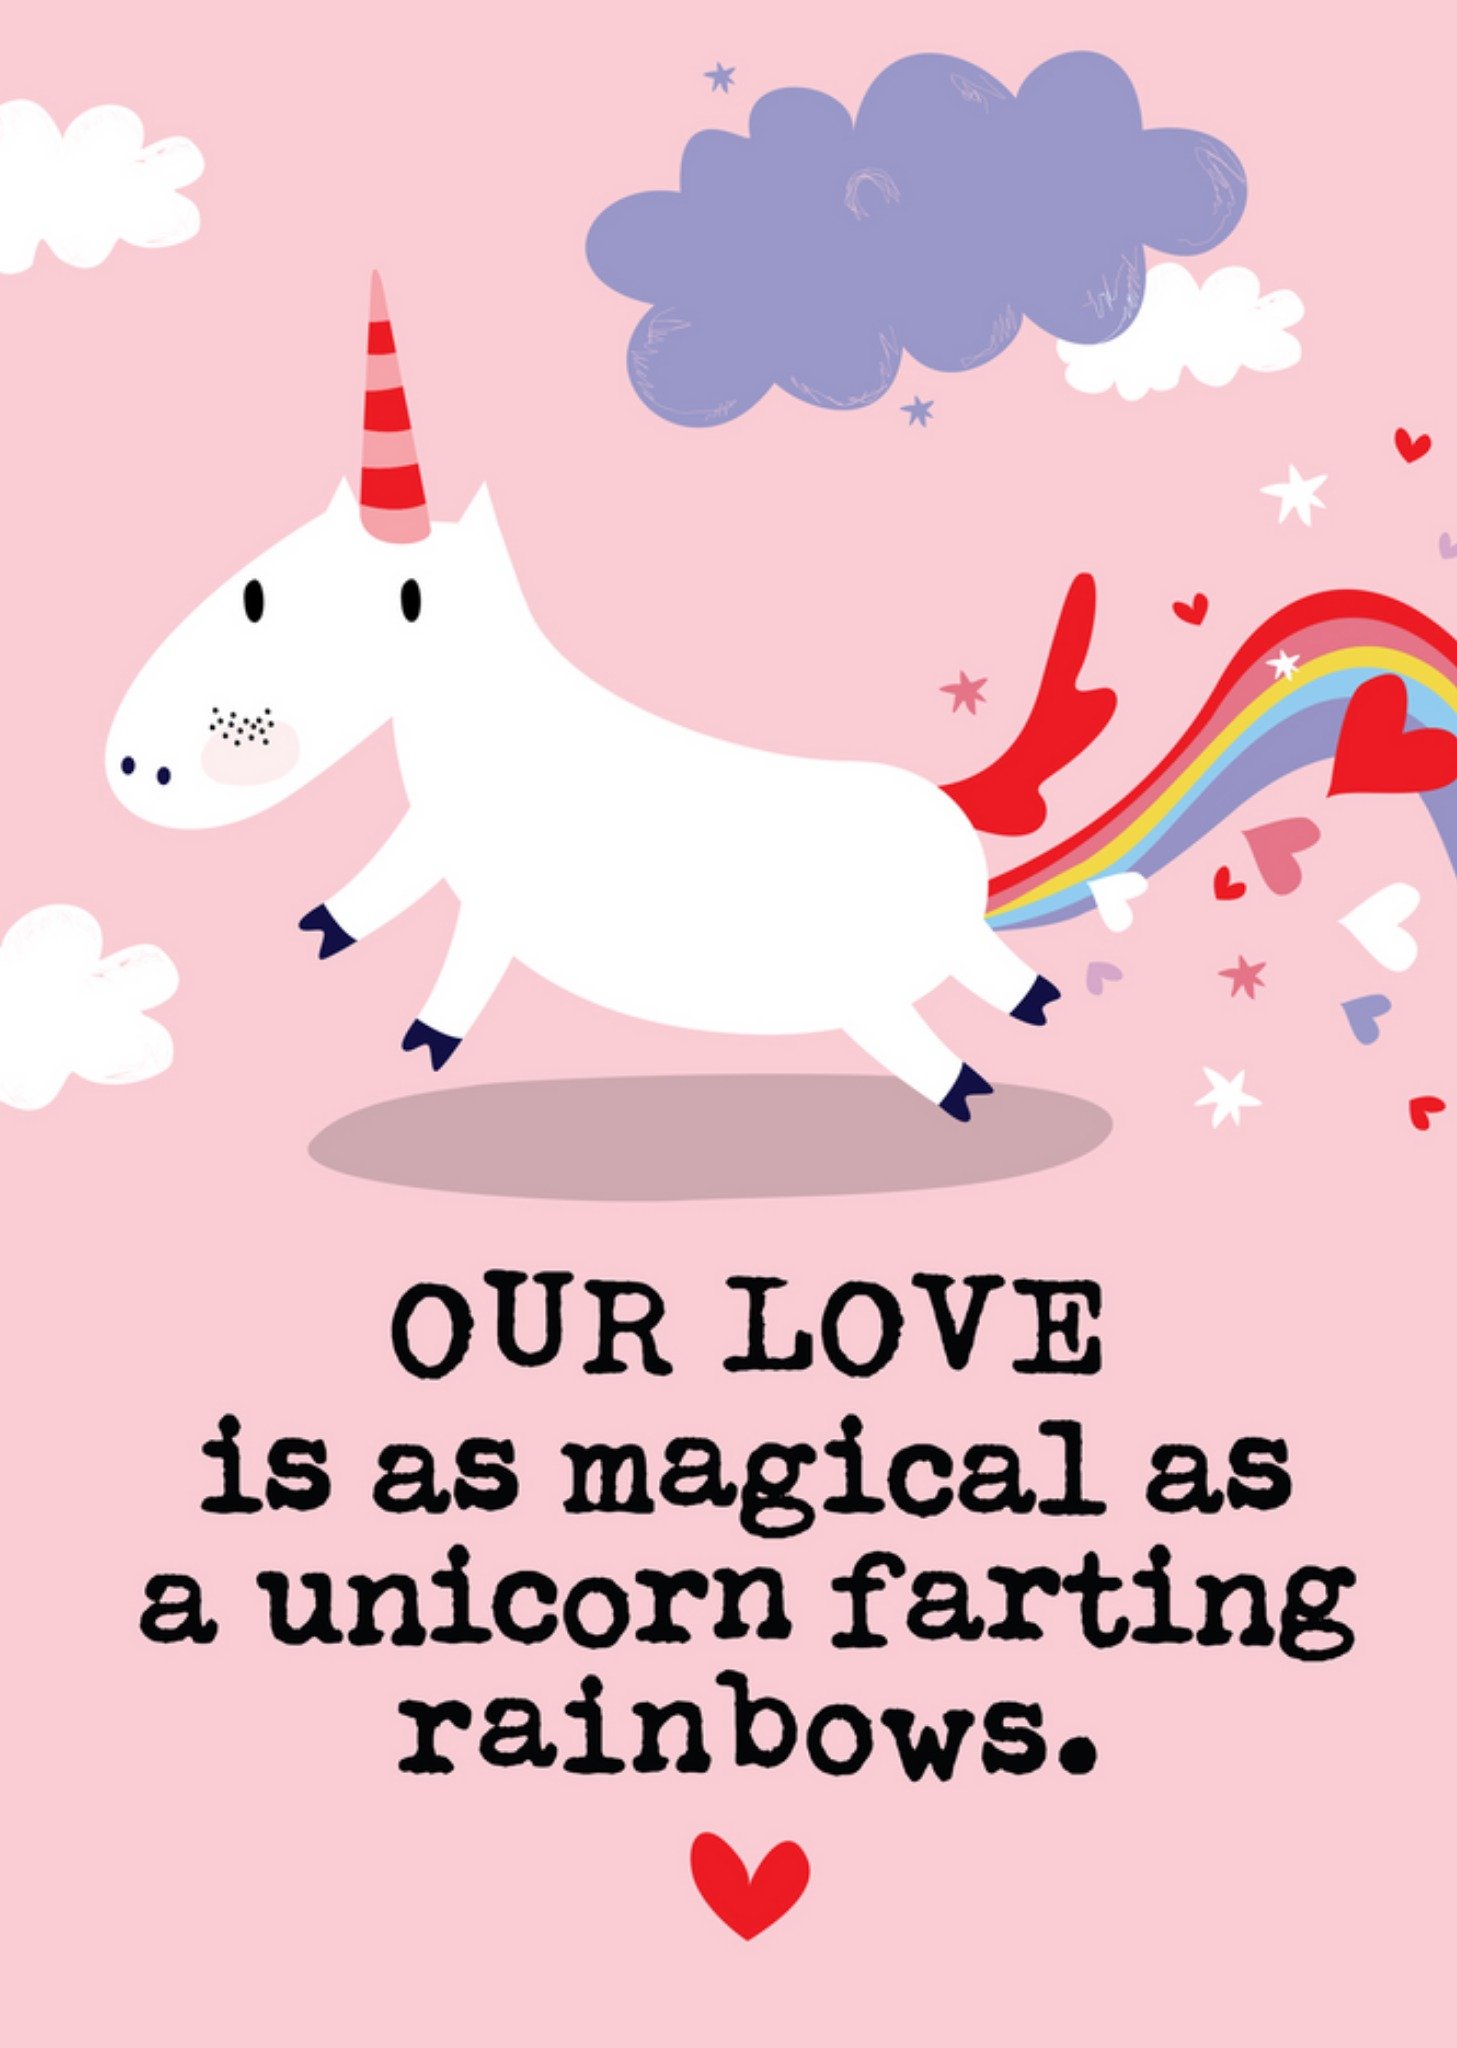 Moonpig Cute And Funny Unicorn Farting Rainbows Valentine's Day Card, Large